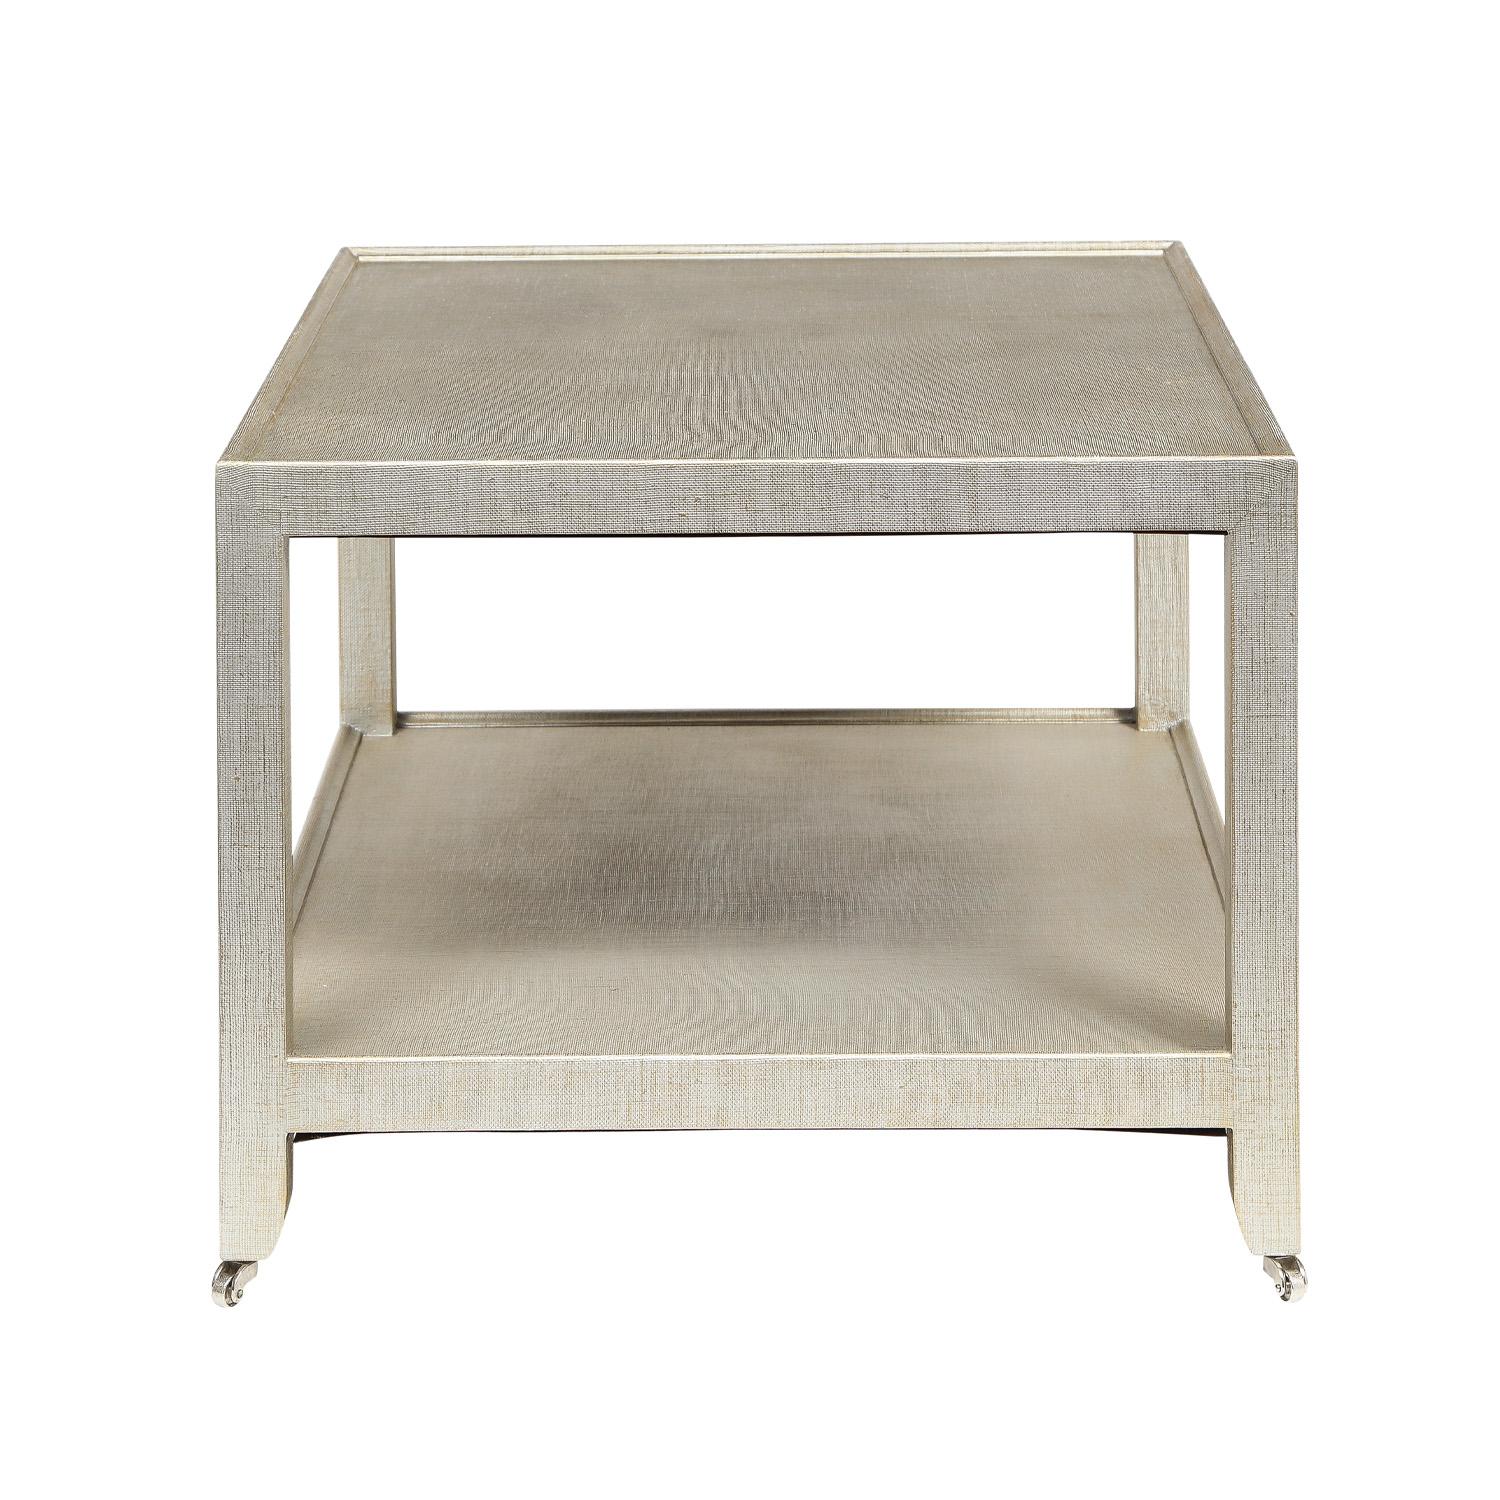 American Karl Springer 2-Tier Coffee Table in Platinum Lacquered Linen 1994 'Signed'